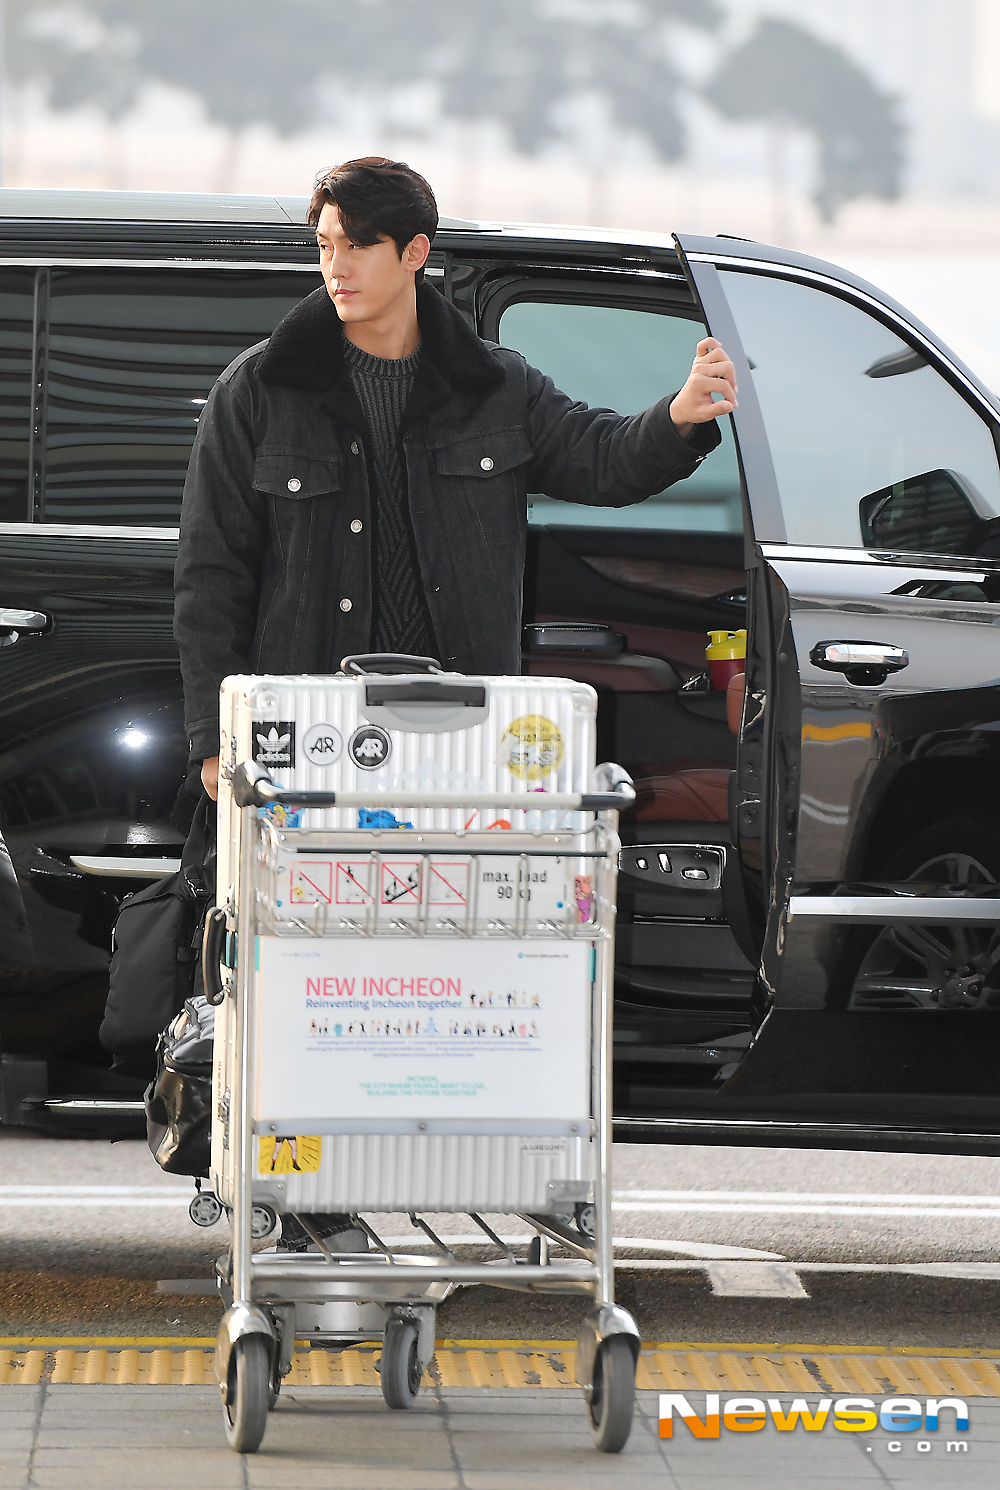 Actor Lee Ki-woo departed for Finland via ICN airport KIX Passenger Terminal l on the morning of November 15th, showing off his airport fashionLee Ki-woo is getting off the vehicle on the day.Lee Ki-woo left for TVN Seoul Mates Season 2 shooting car Finland.expressiveness